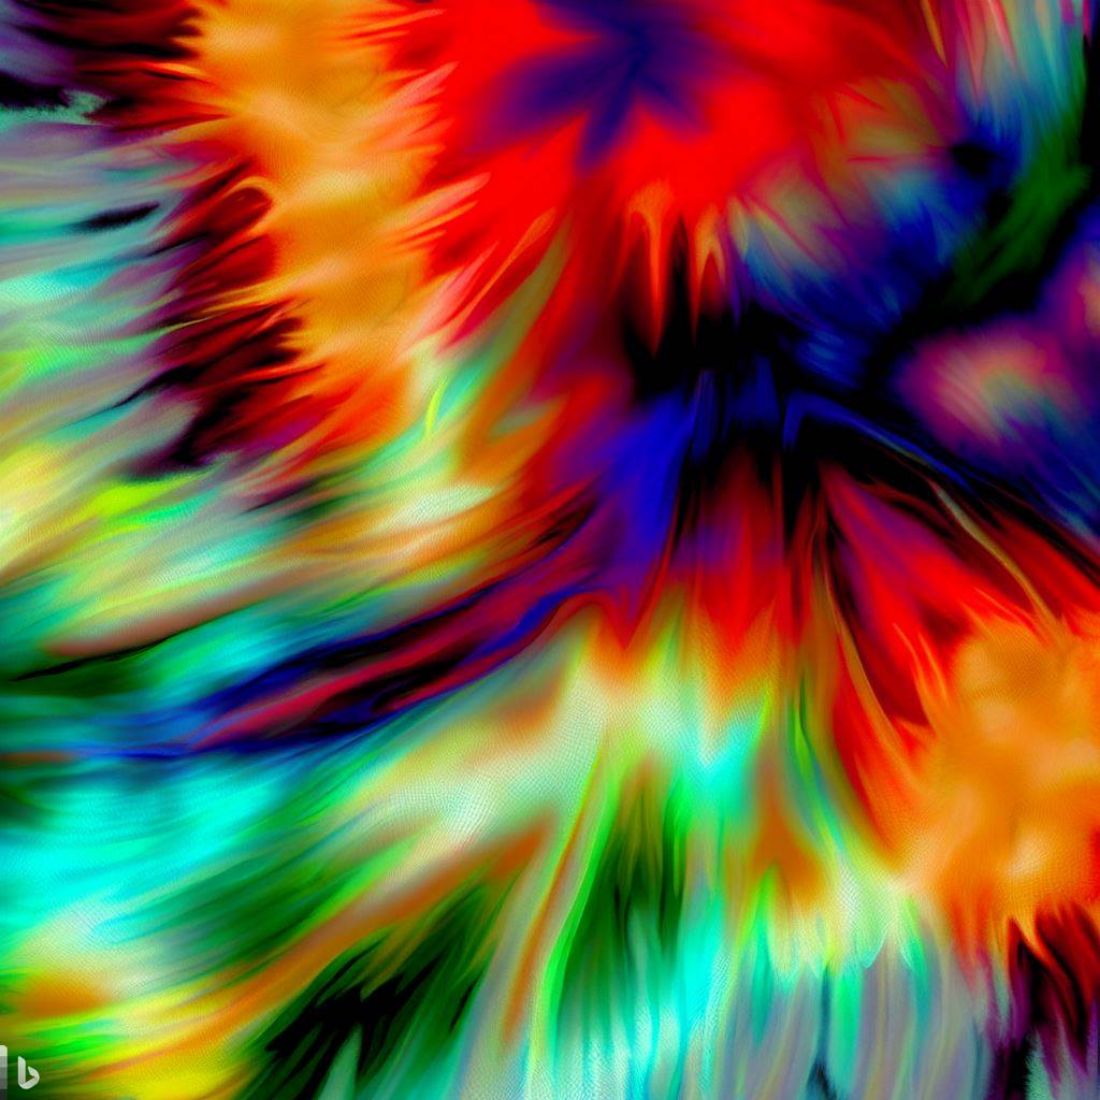 4 Tie dye psychedelic background images in varoius colour combinations